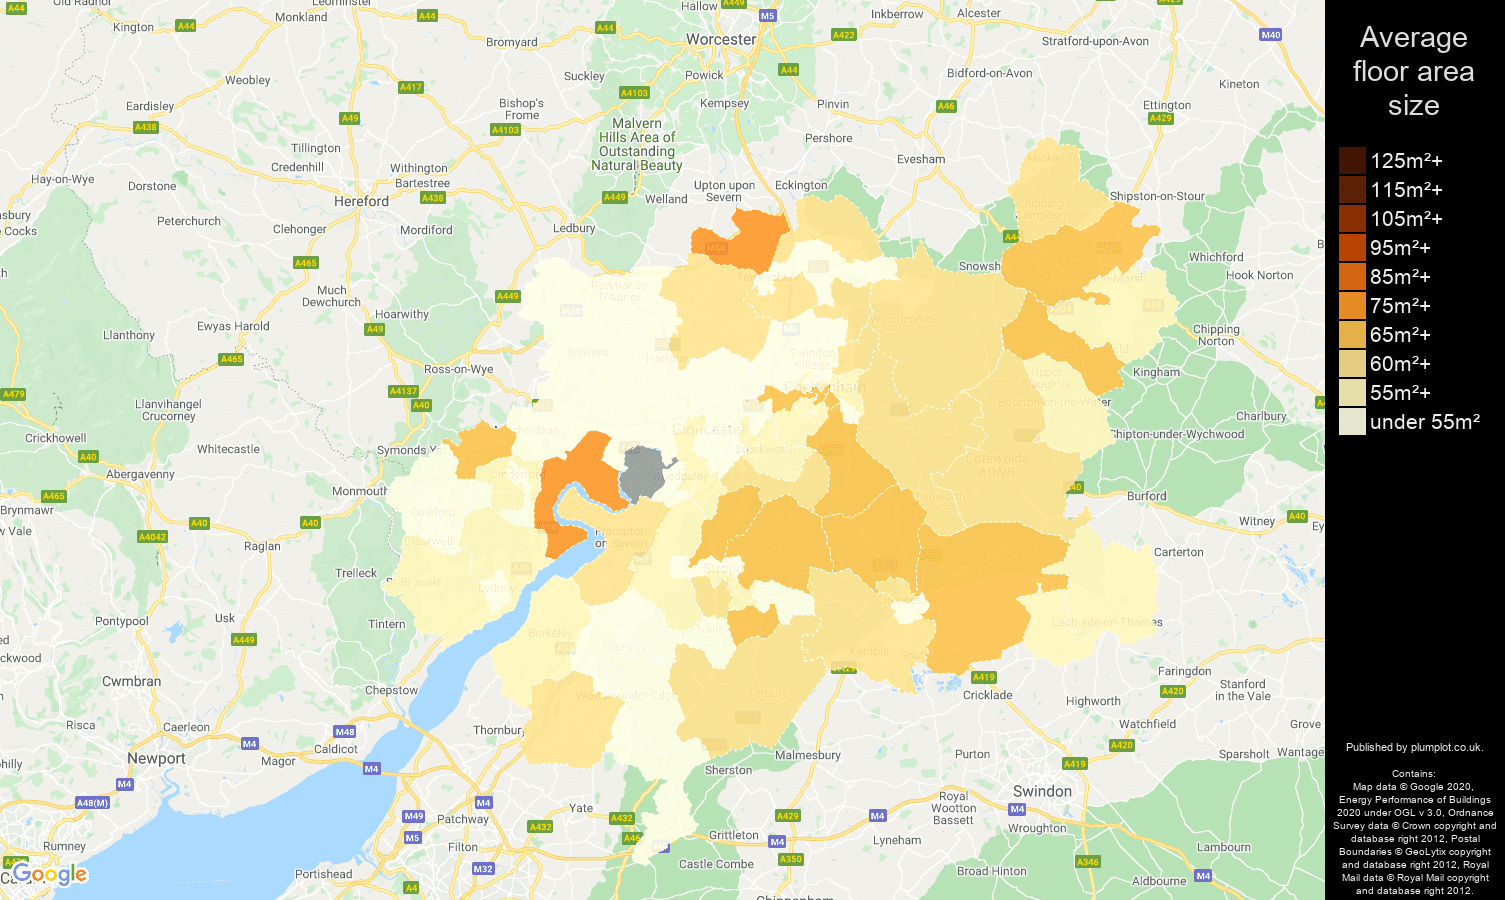 Gloucester map of average floor area size of flats